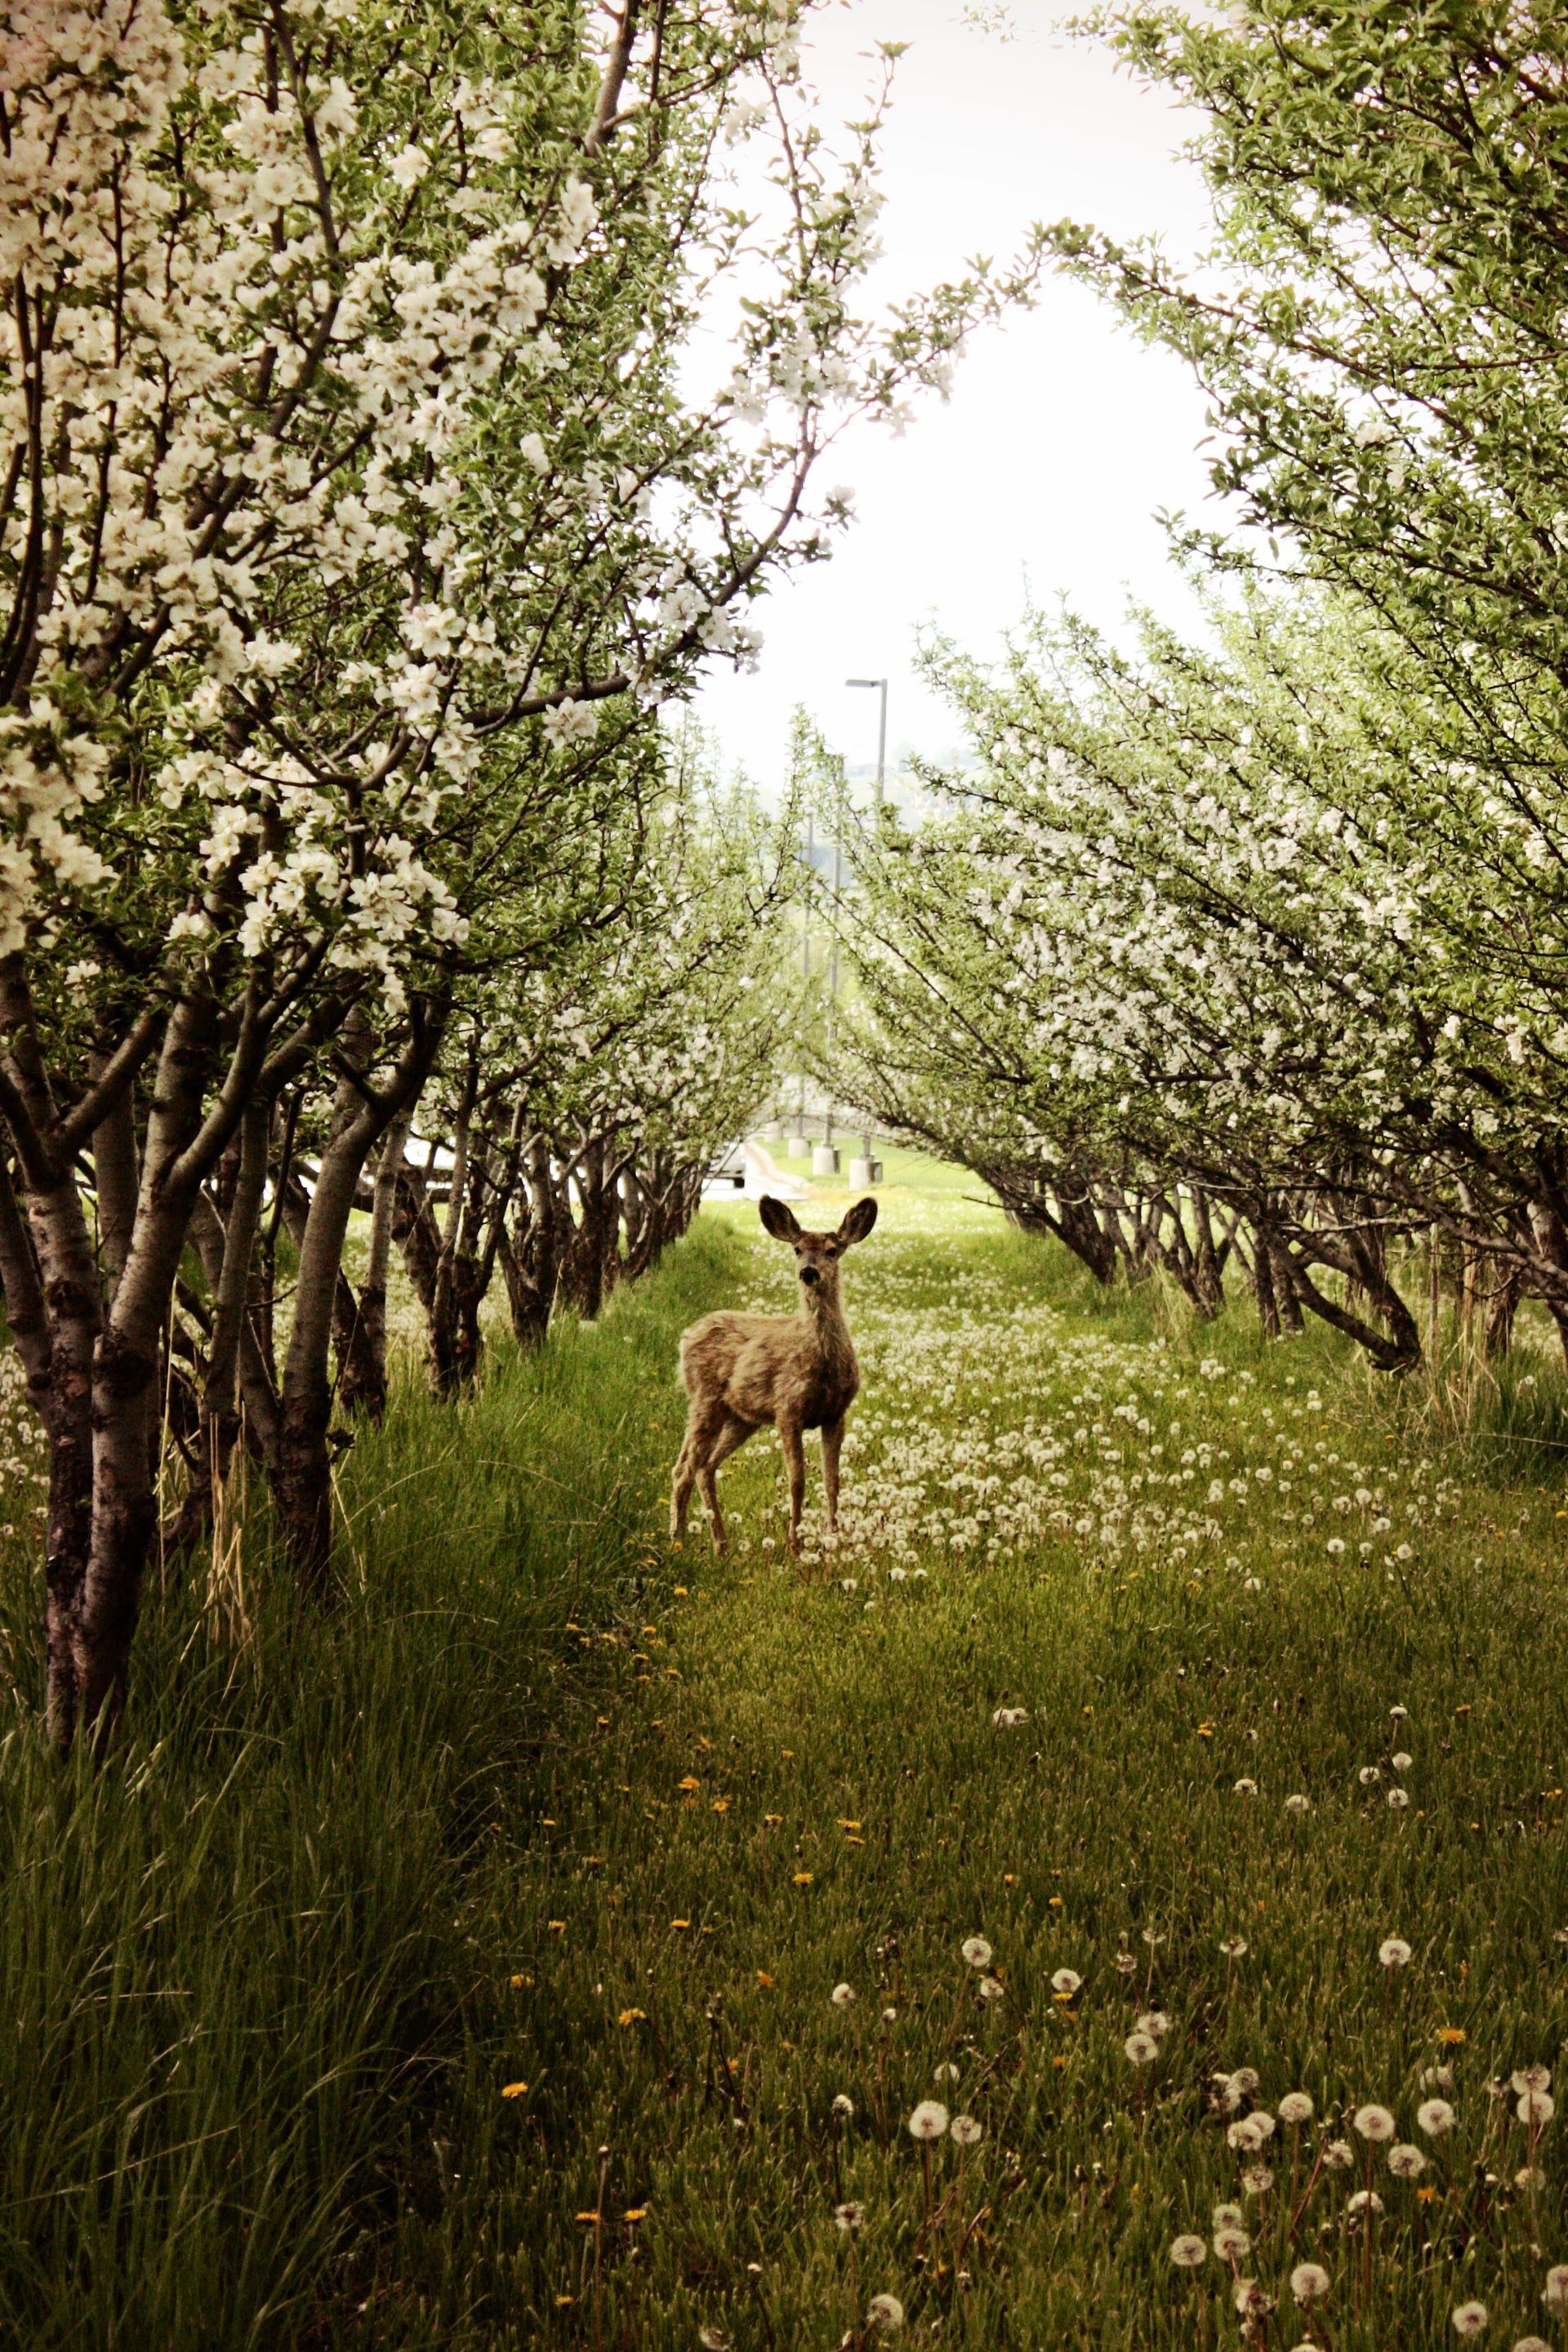 A deer standing in an orchard of trees covered in blossoms.